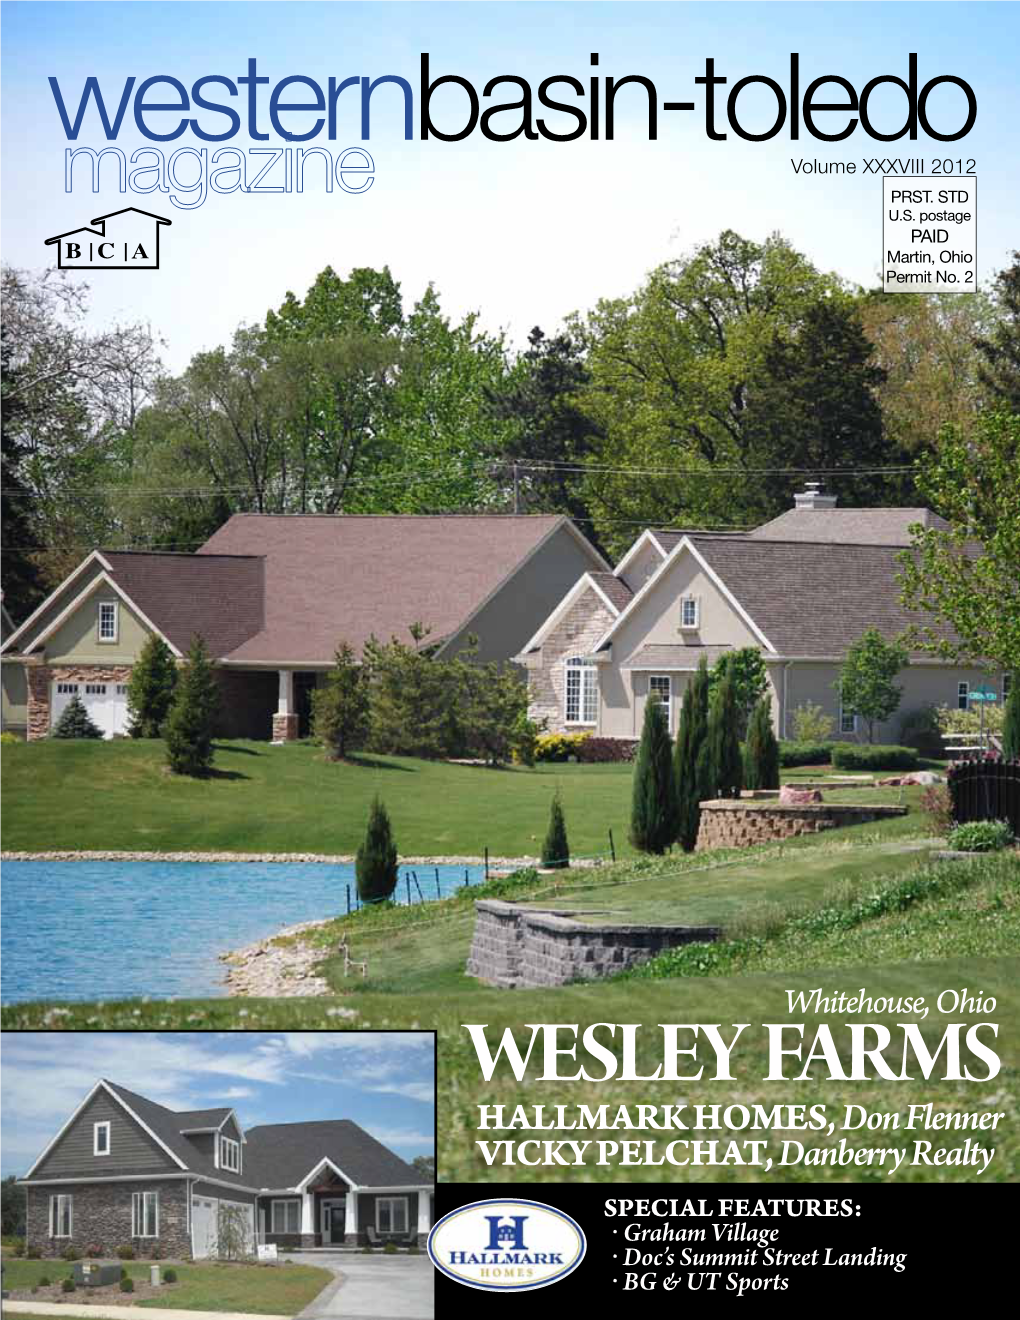 Wesley Farms Hallmark Homes, Don Flenner Vicky Pelchat, Danberry Realty Special Features